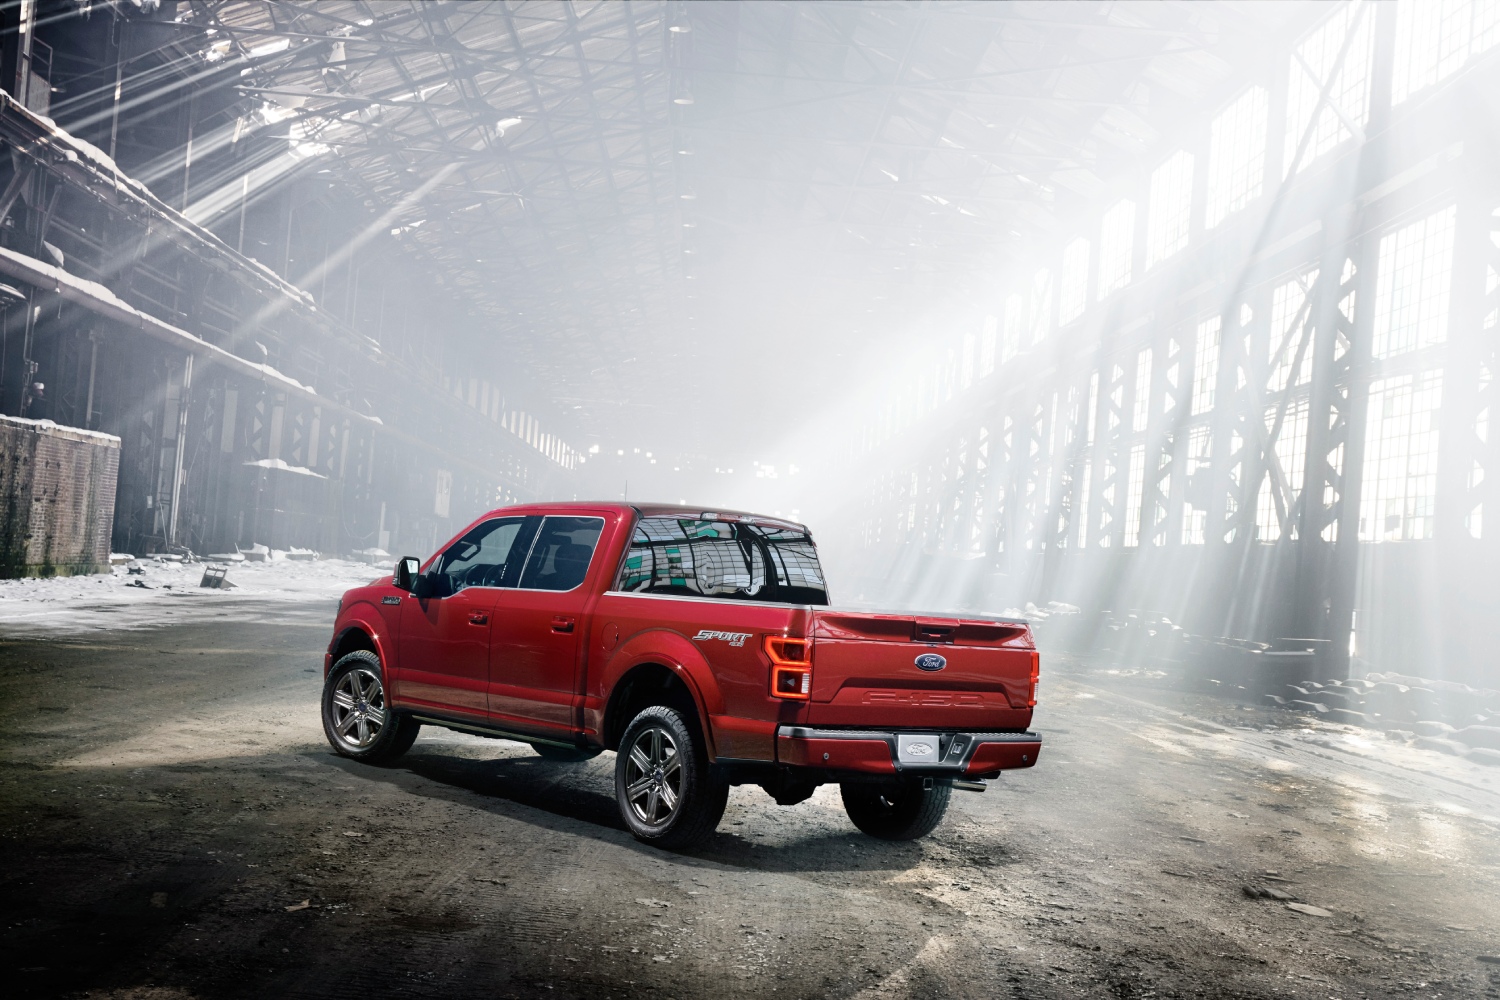 These reliable and popular full-size pickup trucks like the Ford F-150